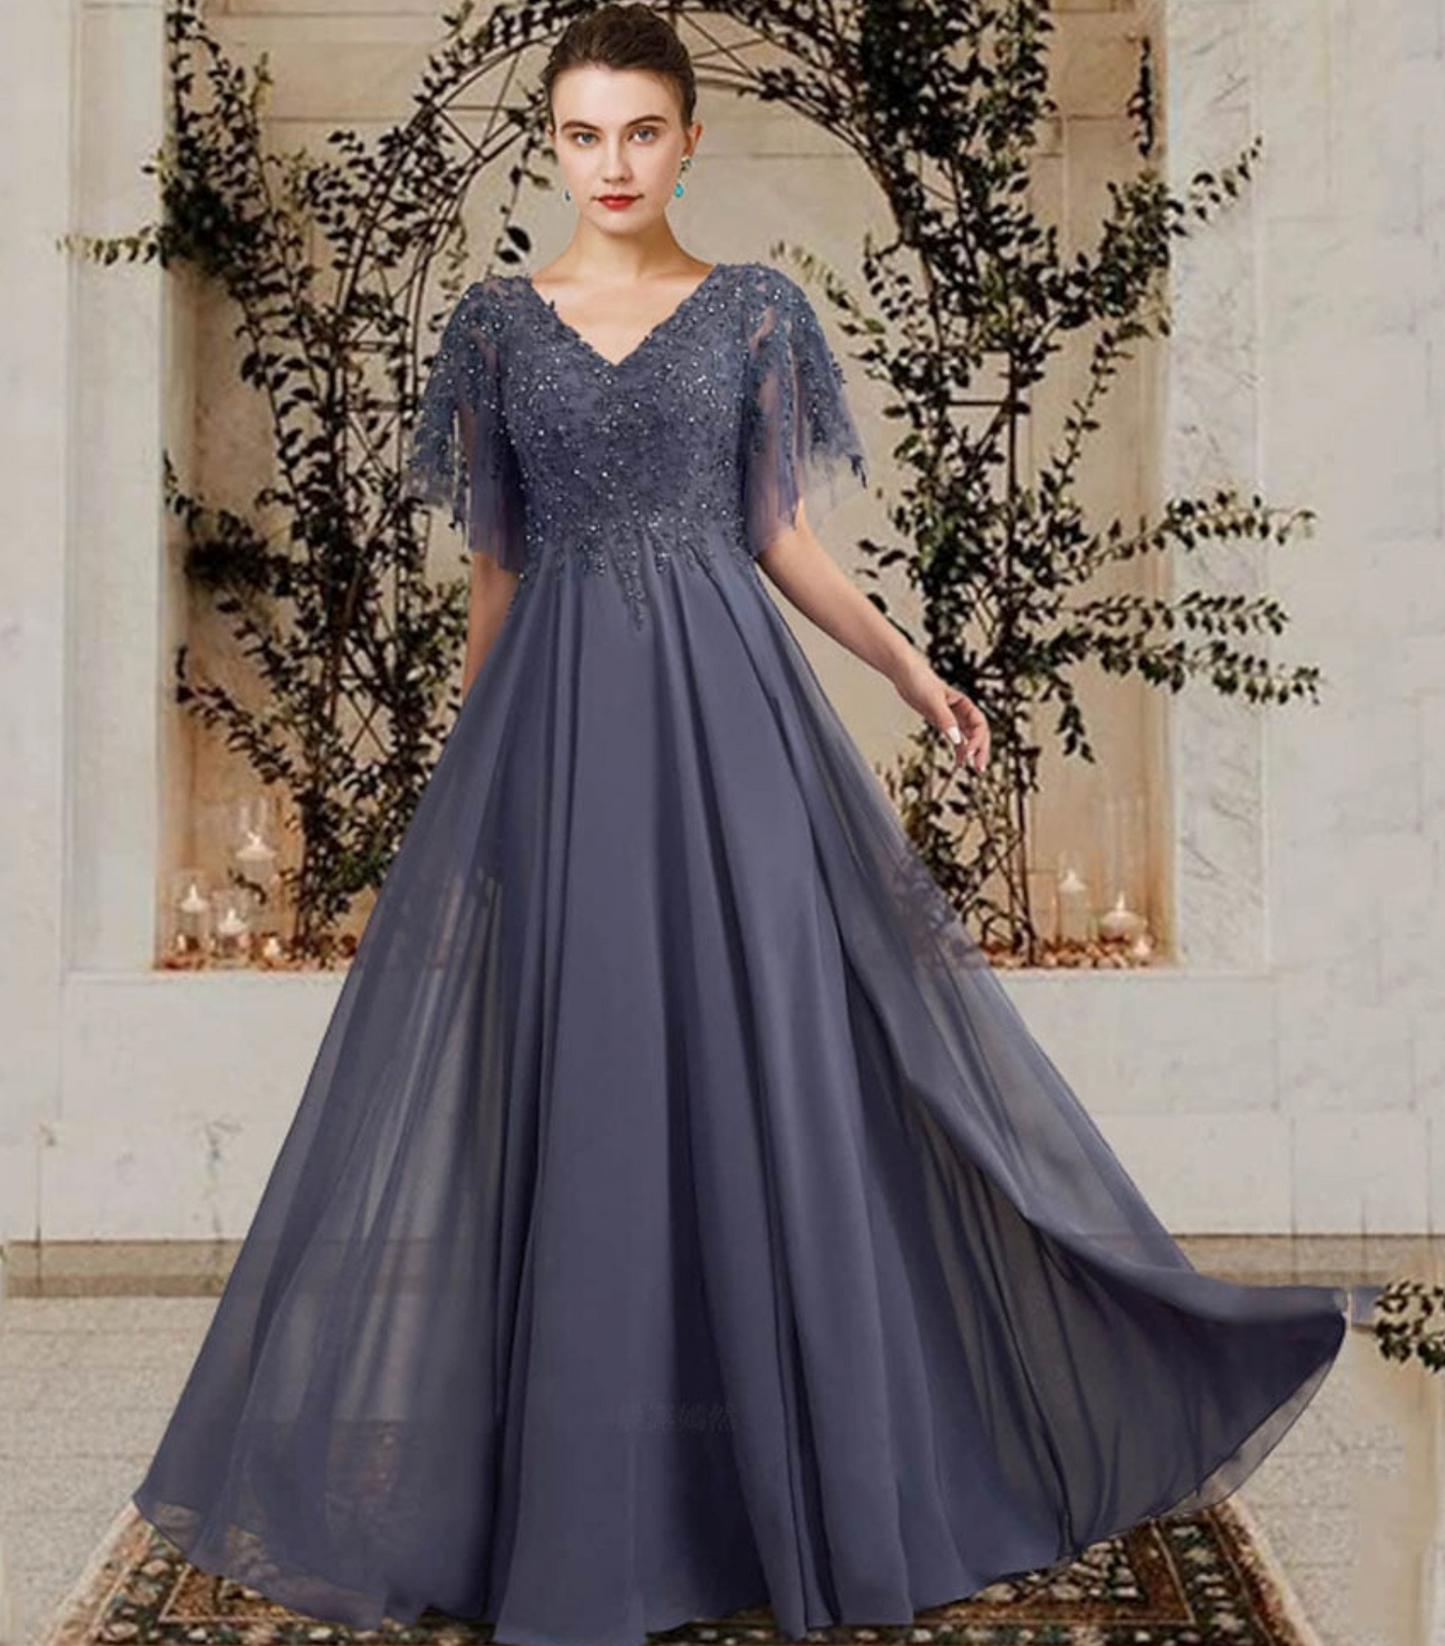 Long Mother of the Bride Chiffon Dress Elegant Wedding Guest Gown